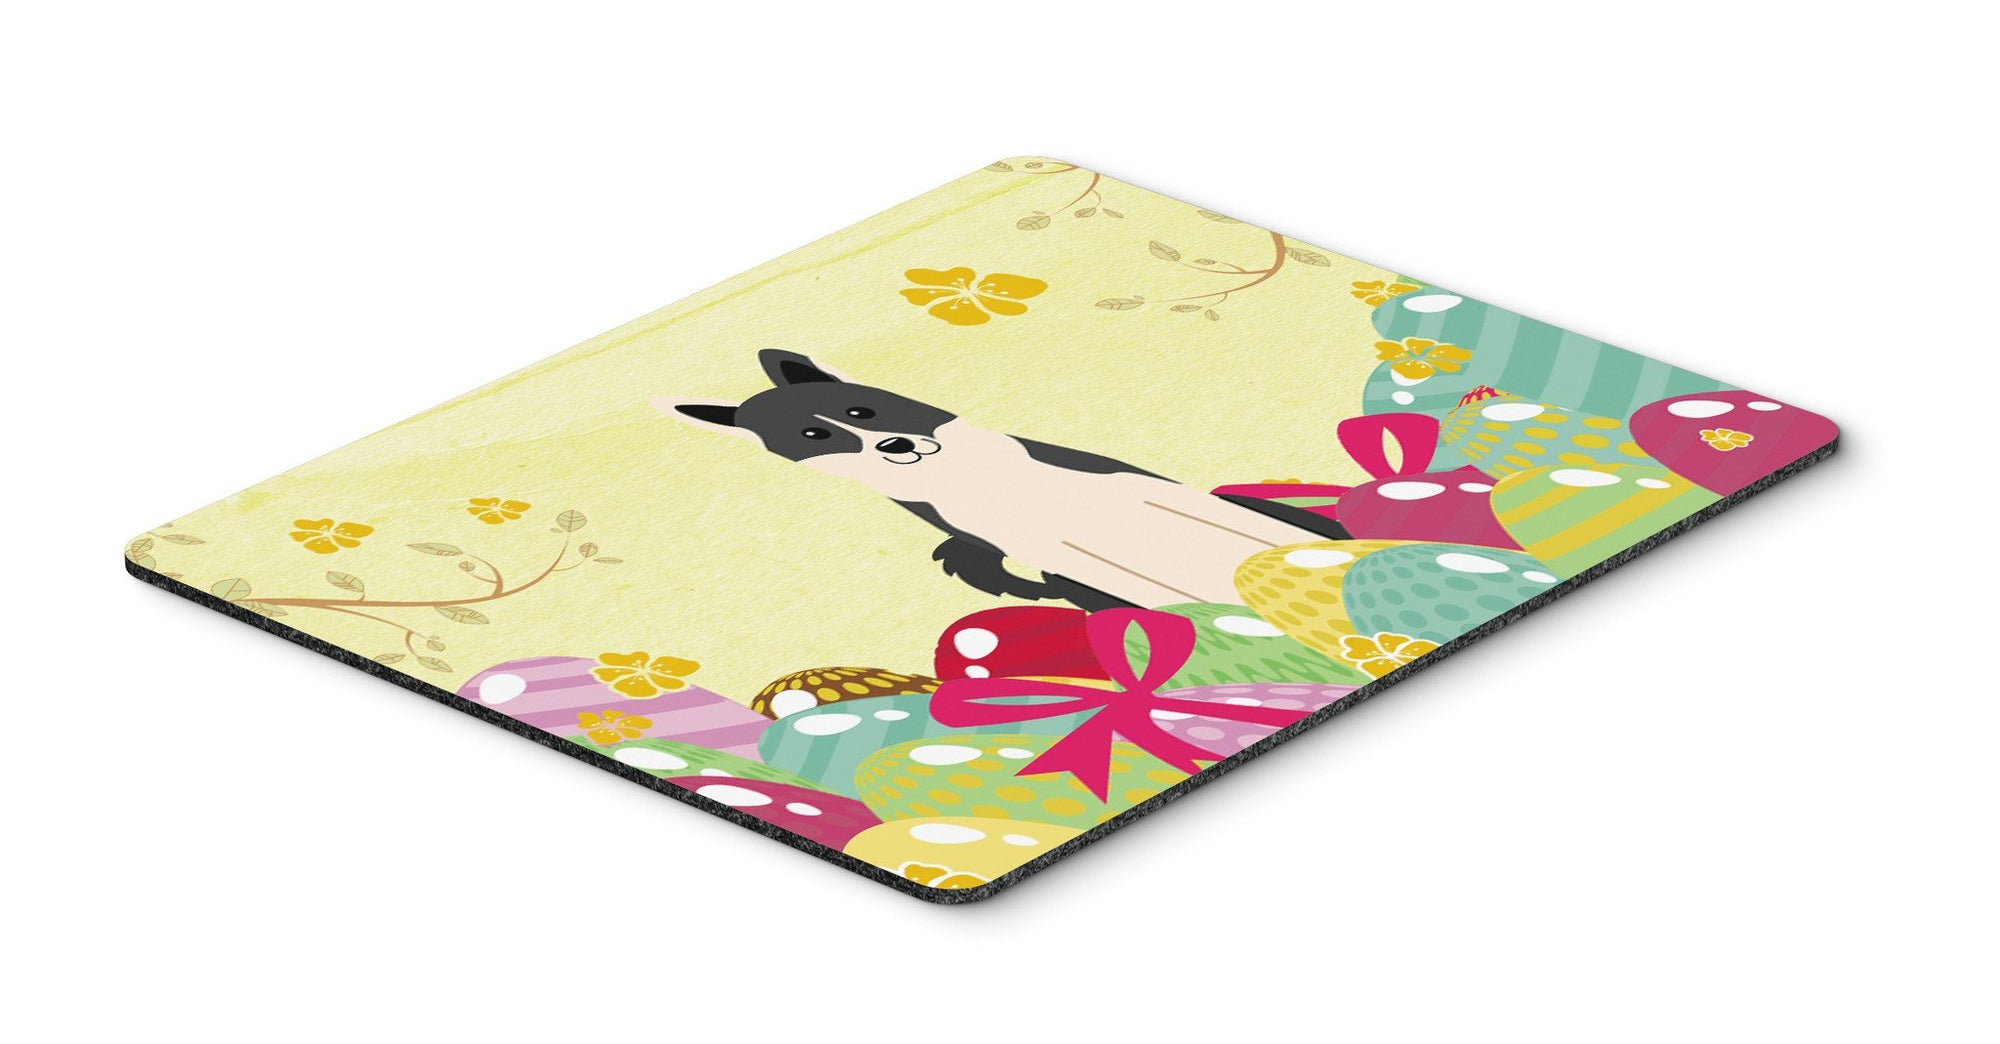 Easter Eggs Russo-European Laika Spitz Mouse Pad, Hot Pad or Trivet BB6029MP by Caroline's Treasures